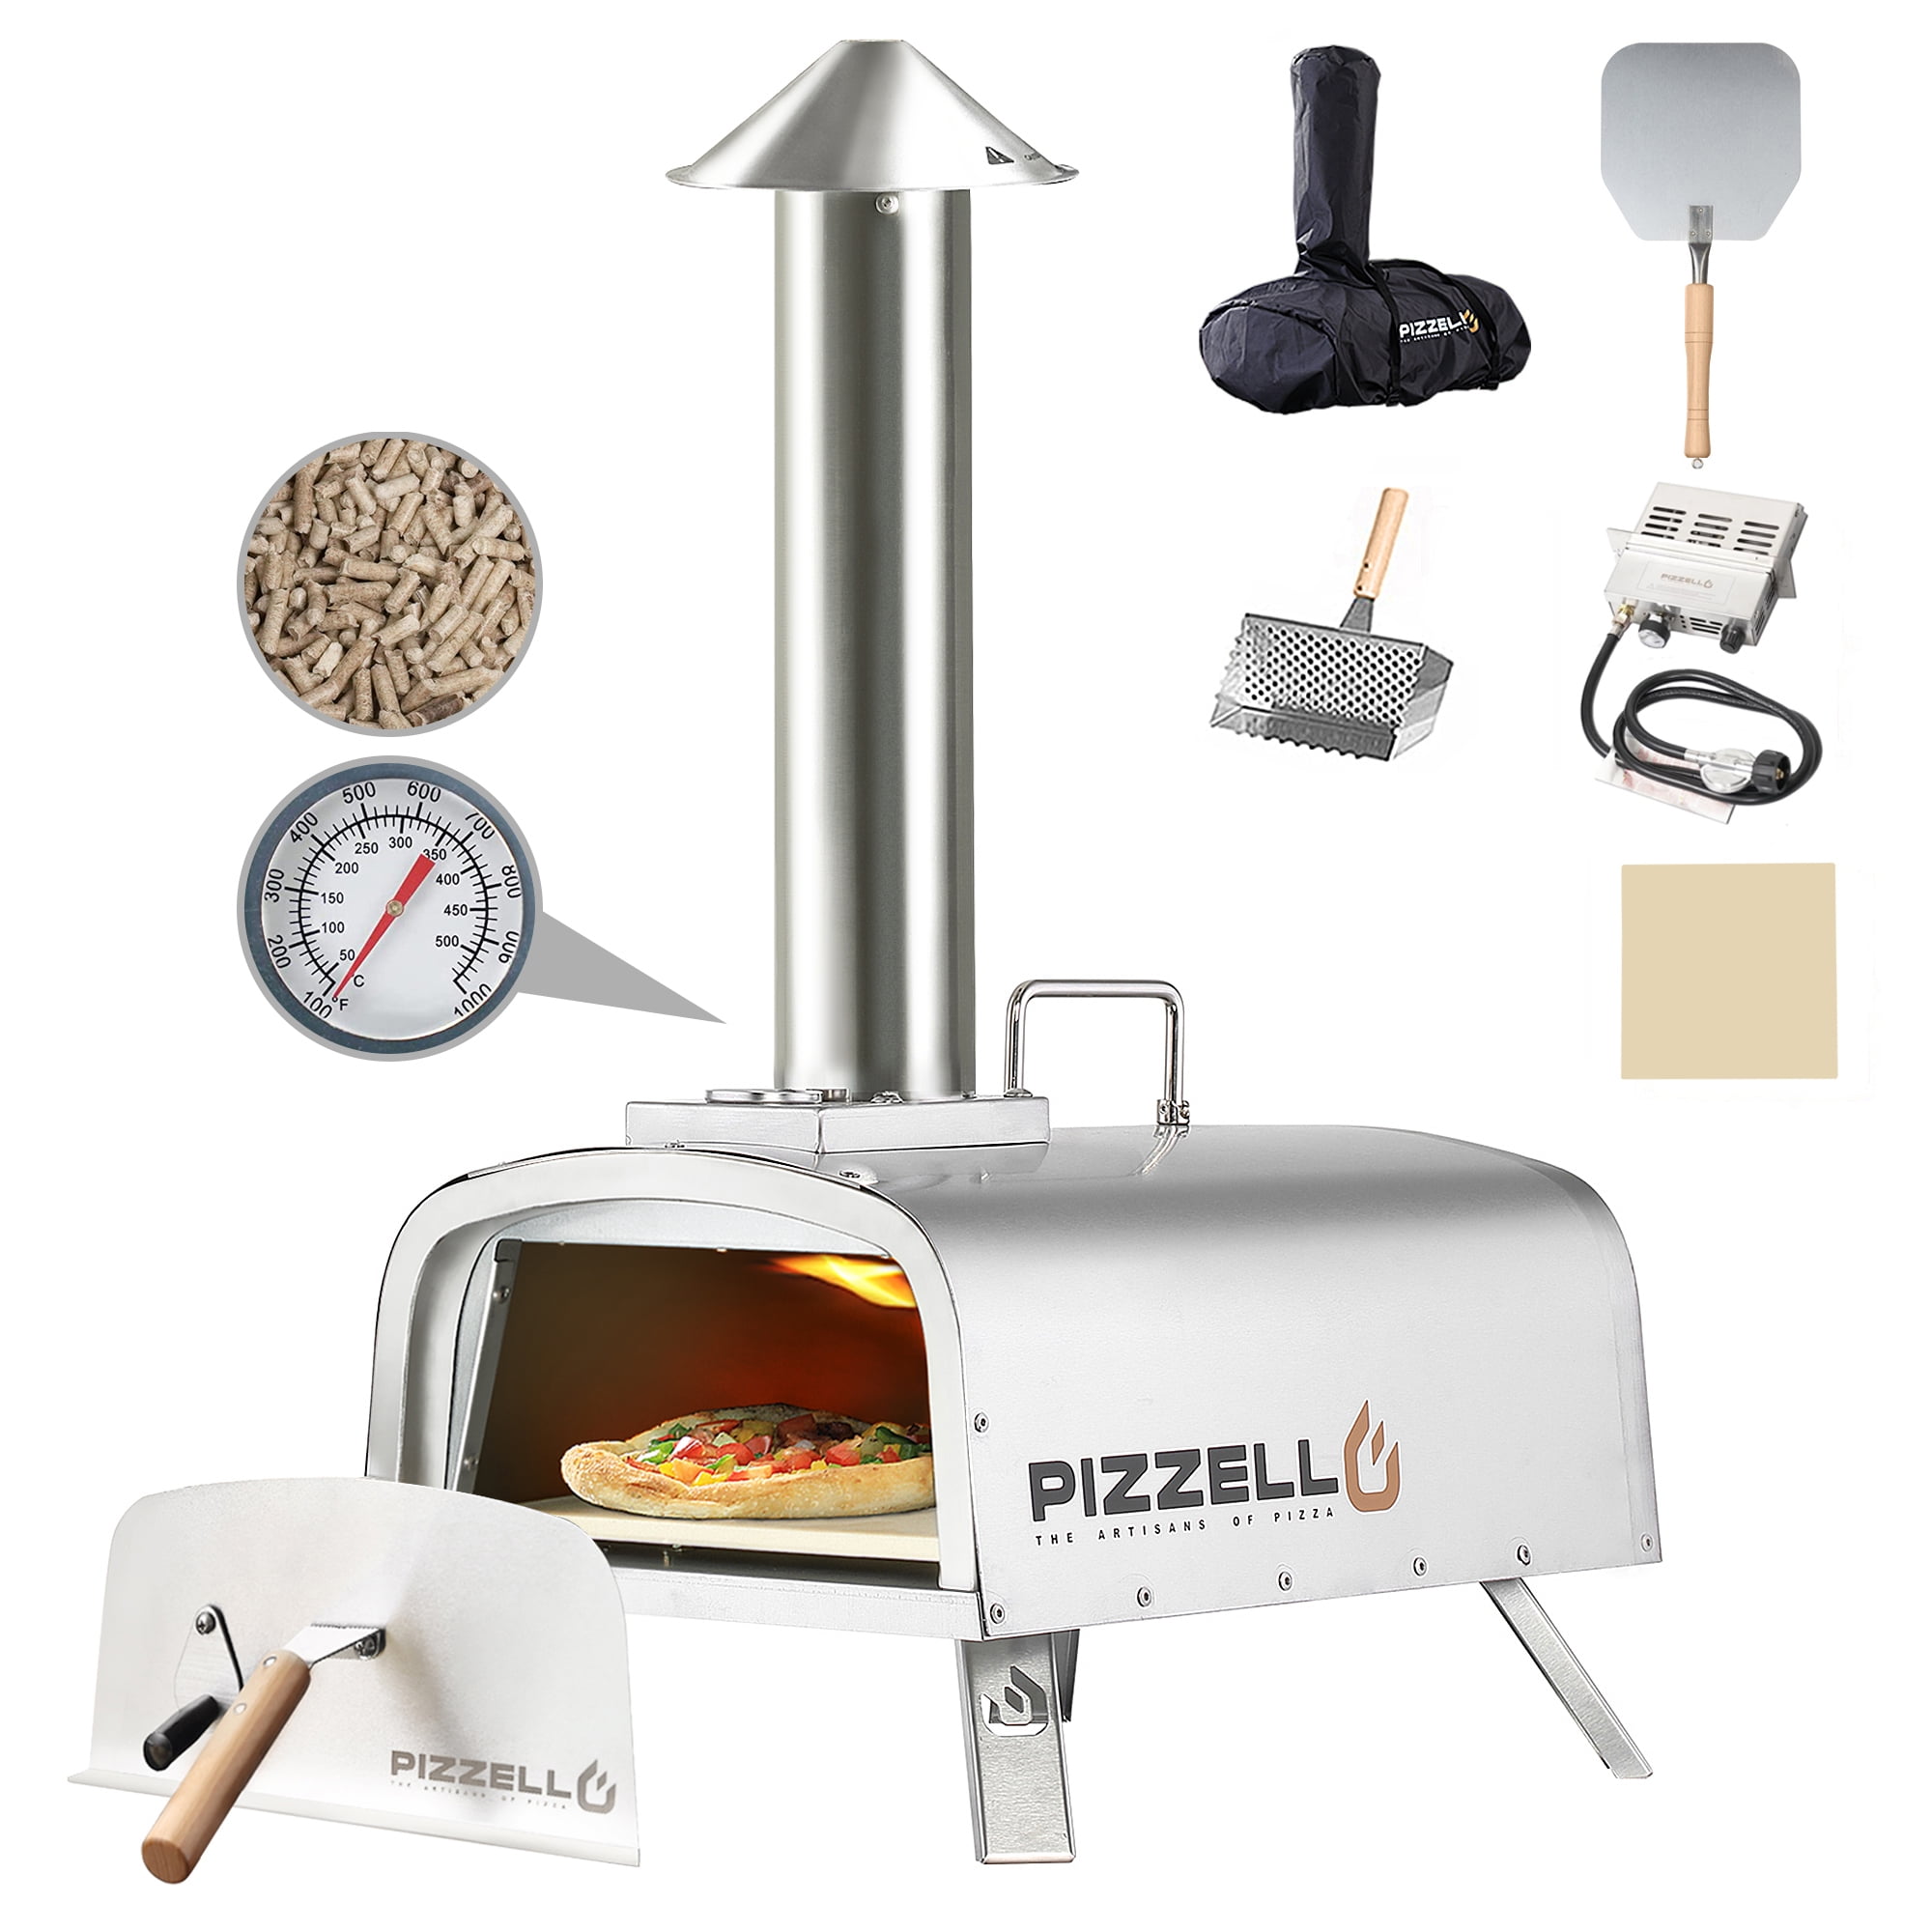 Turpone 12 in. Mini Rotating Stone Propane Outdoor Pizza Oven with Peel in Stainless Steel, Silver